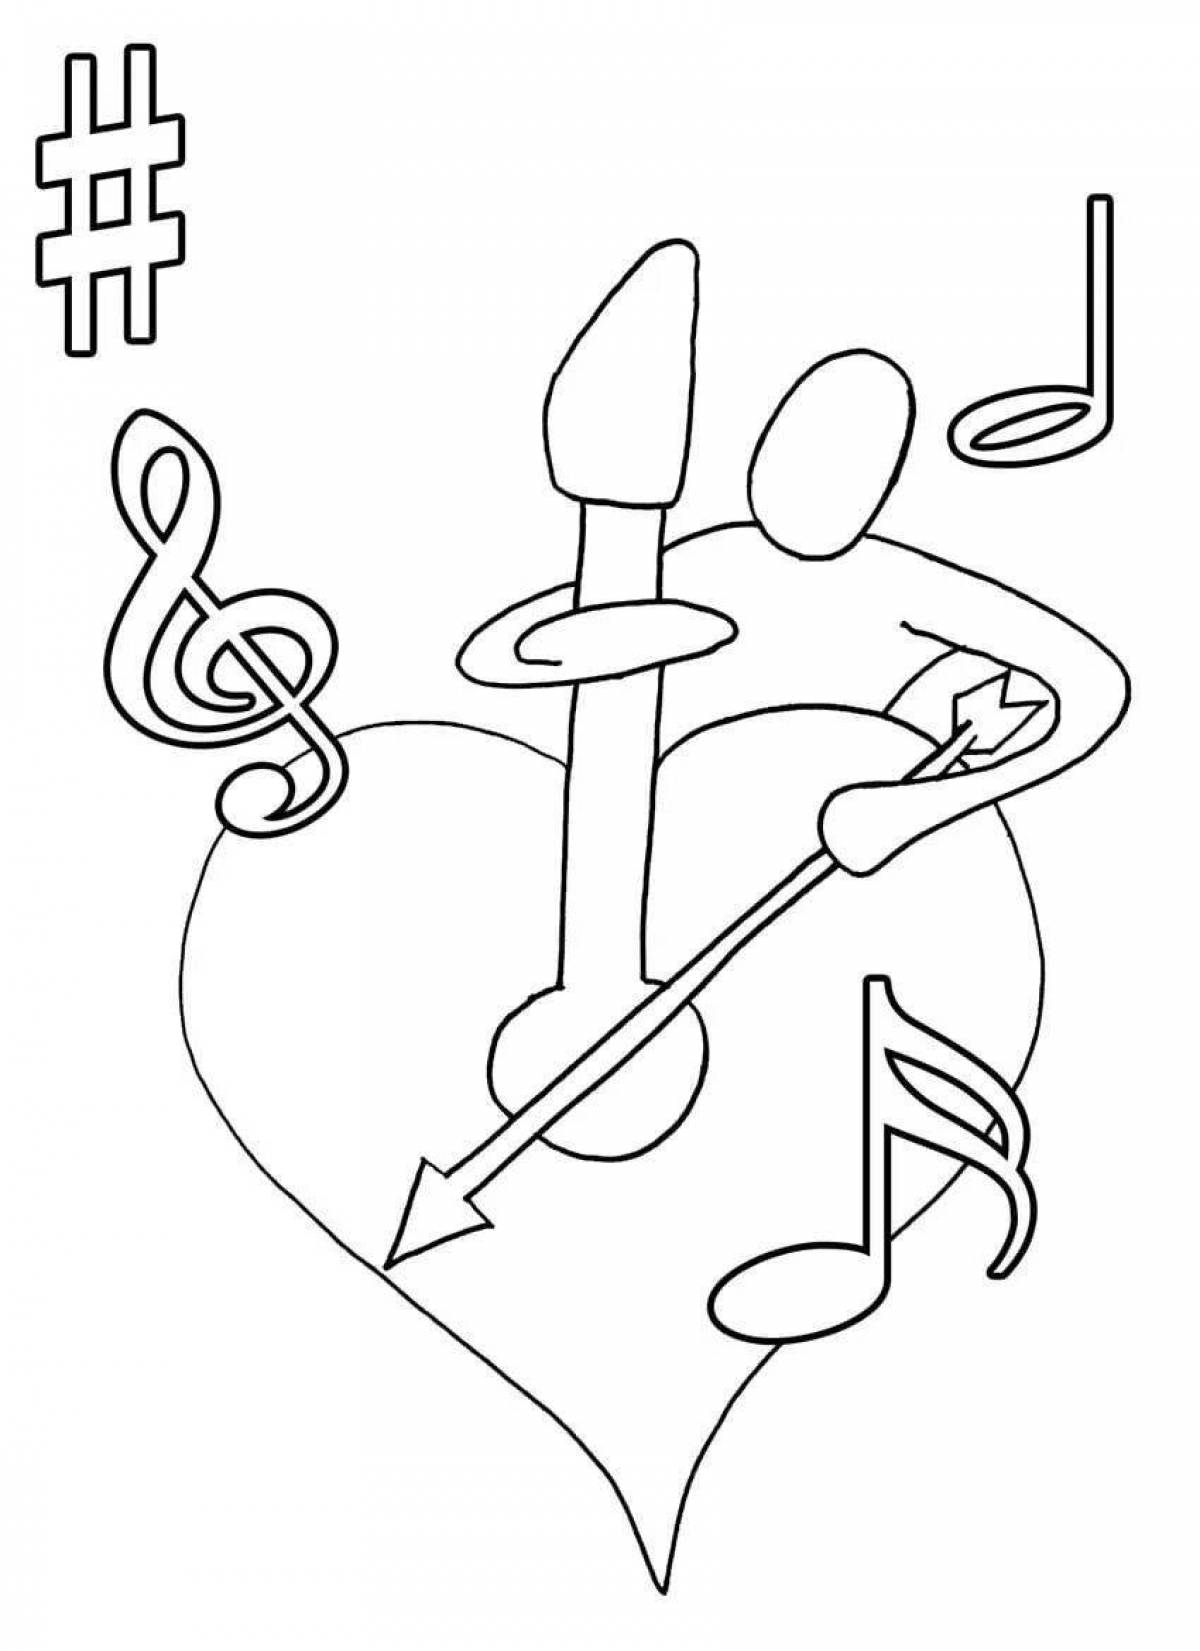 Brilliant coloring page melody